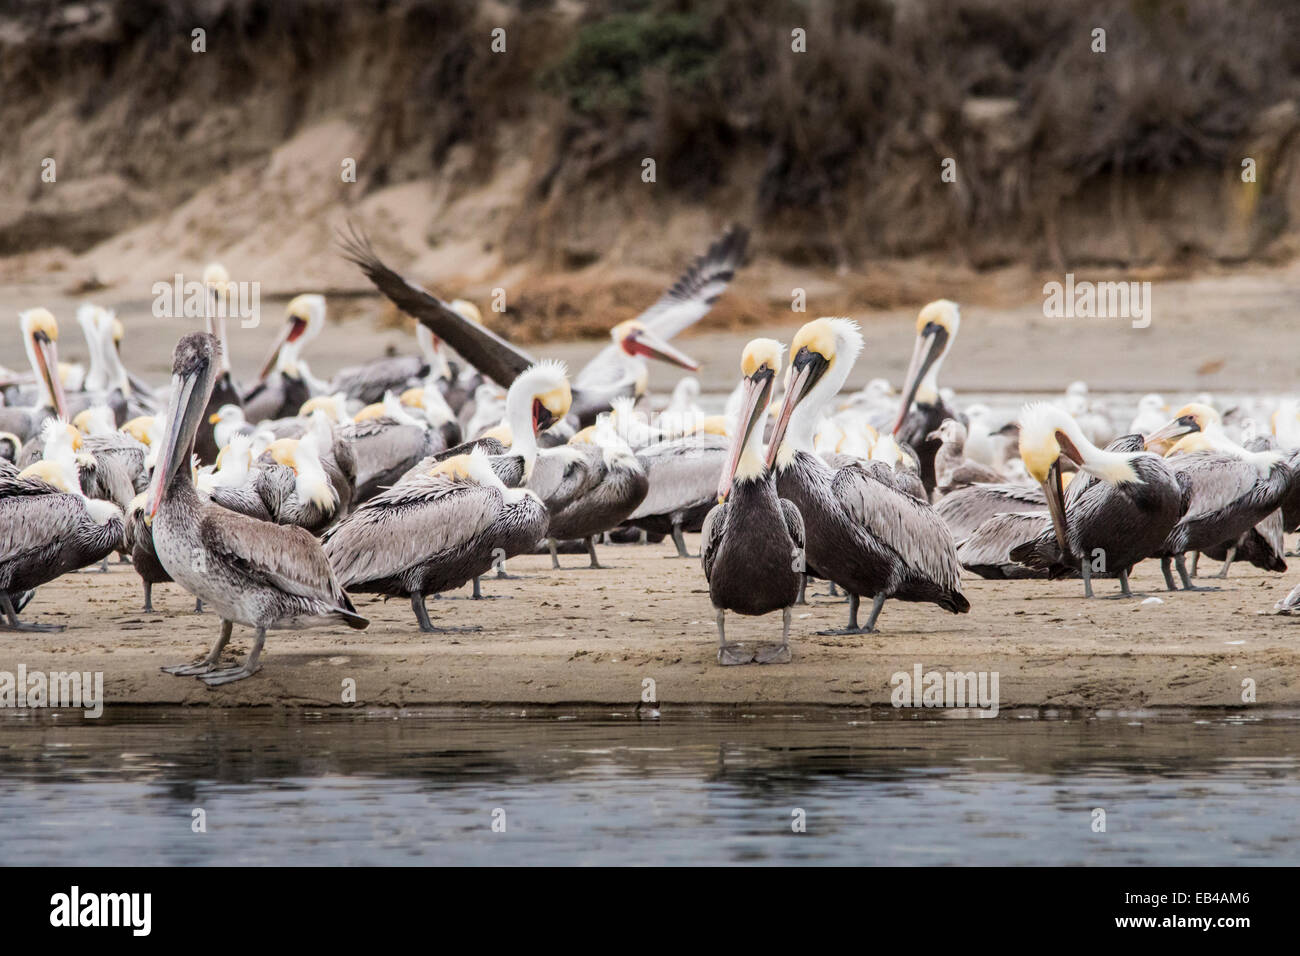 Colony of young brown pelicans on the beach with sand dunes in the background. Stock Photo